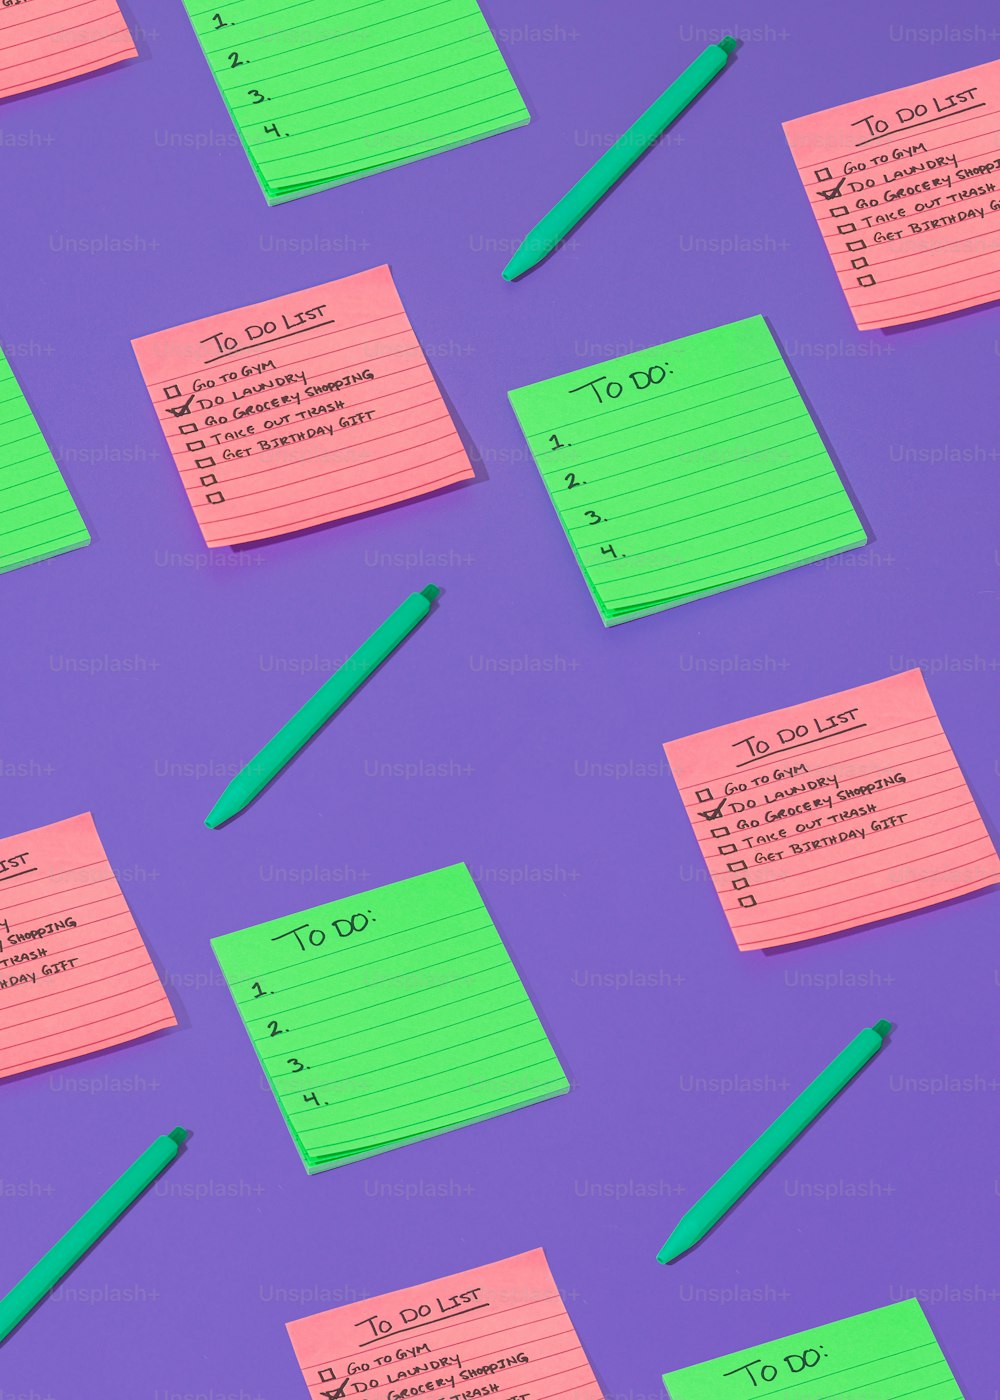 a bunch of sticky notes on a purple surface